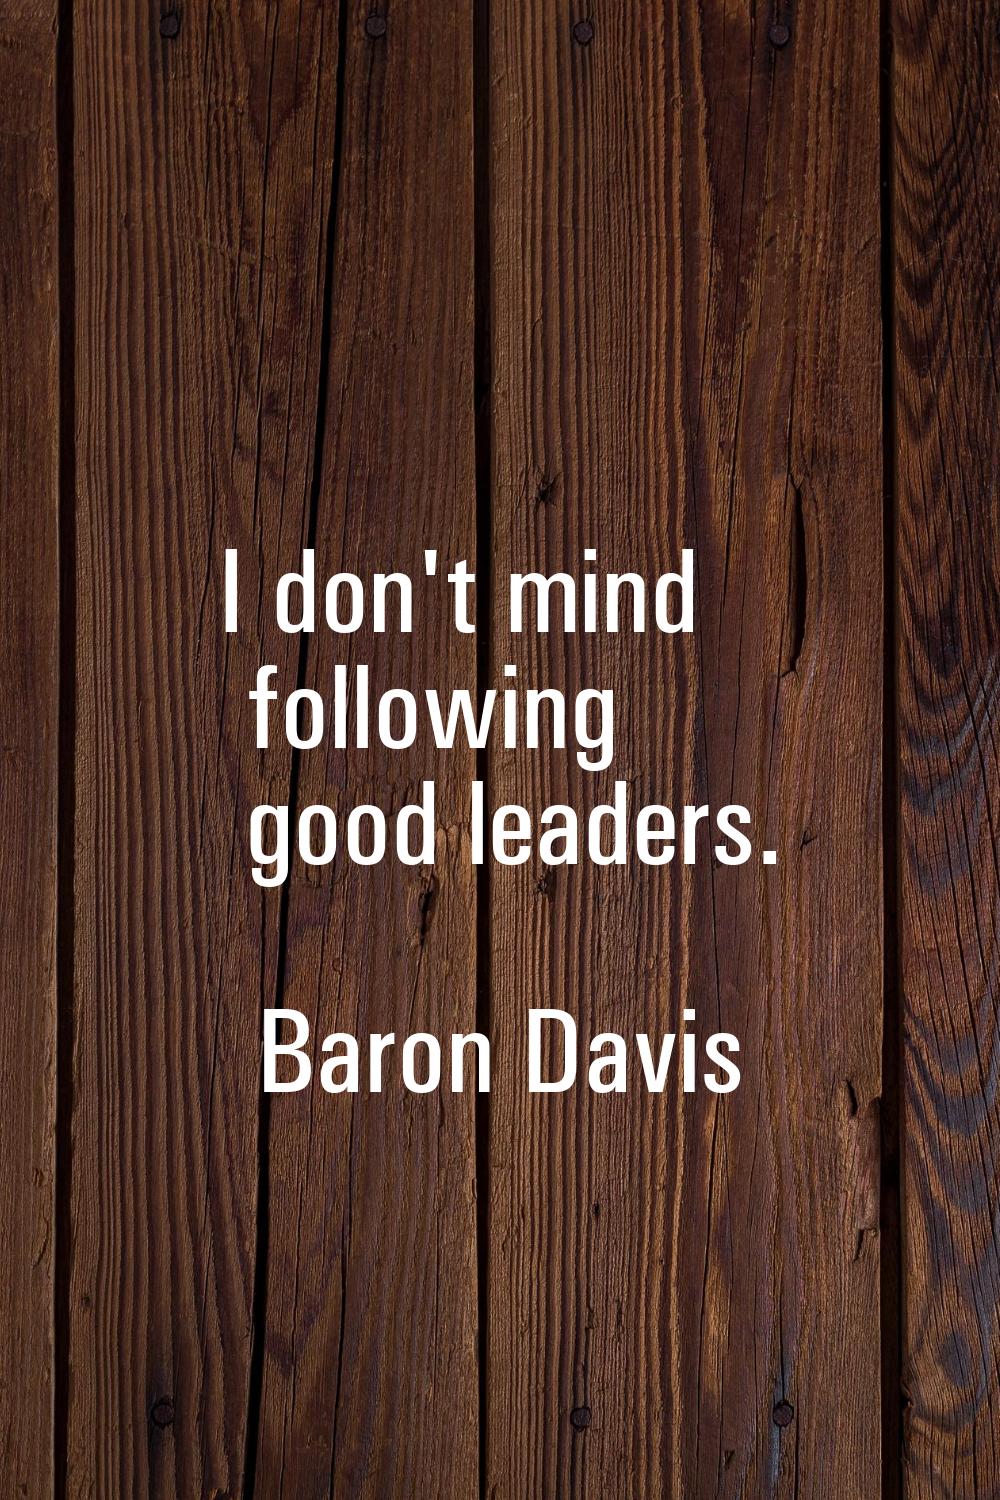 I don't mind following good leaders.